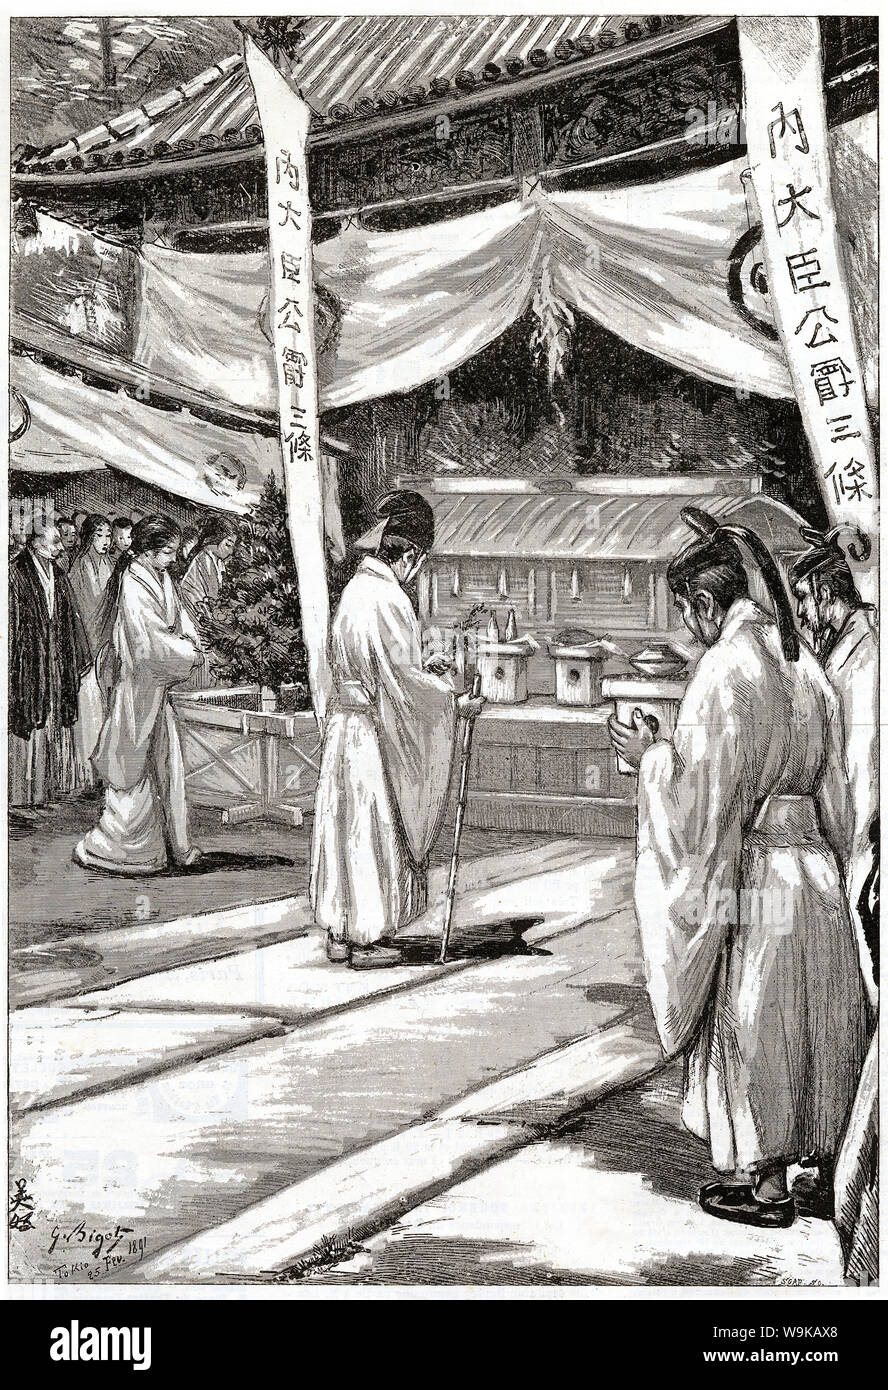 [ 1890s Japan - Funeral of Japanese Prince Sanjo ] —   Shinto ceremony during the state funeral of Prince Sanjo Sanetomi (三条実美, 1837–1891), an Imperial court noble and statesman. His grave is at Gokoku-ji (護国寺) in Bunkyo, Tokyo.  Published in the French illustrated weekly Le Monde Illustré on June 6, 1891 (Meiji 24). Art by French artist Georges Ferdinand Bigot (1860-1927), famous for his satirical cartoons of life in Meiji period Japan.  19th century vintage newspaper illustration. Stock Photo